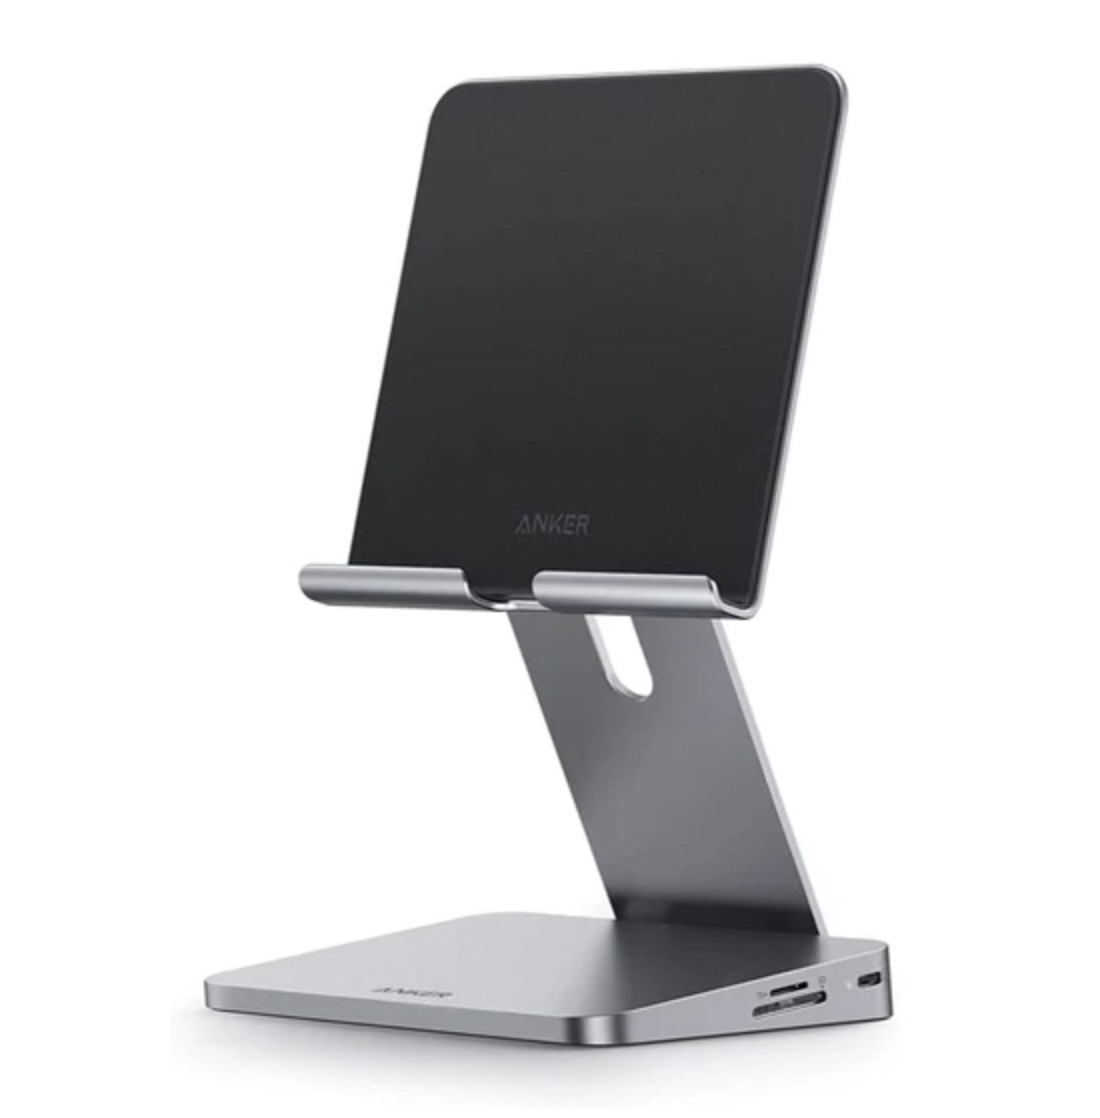 Anker 551 usb-c ハブ (8-in-1, Tablet stand)